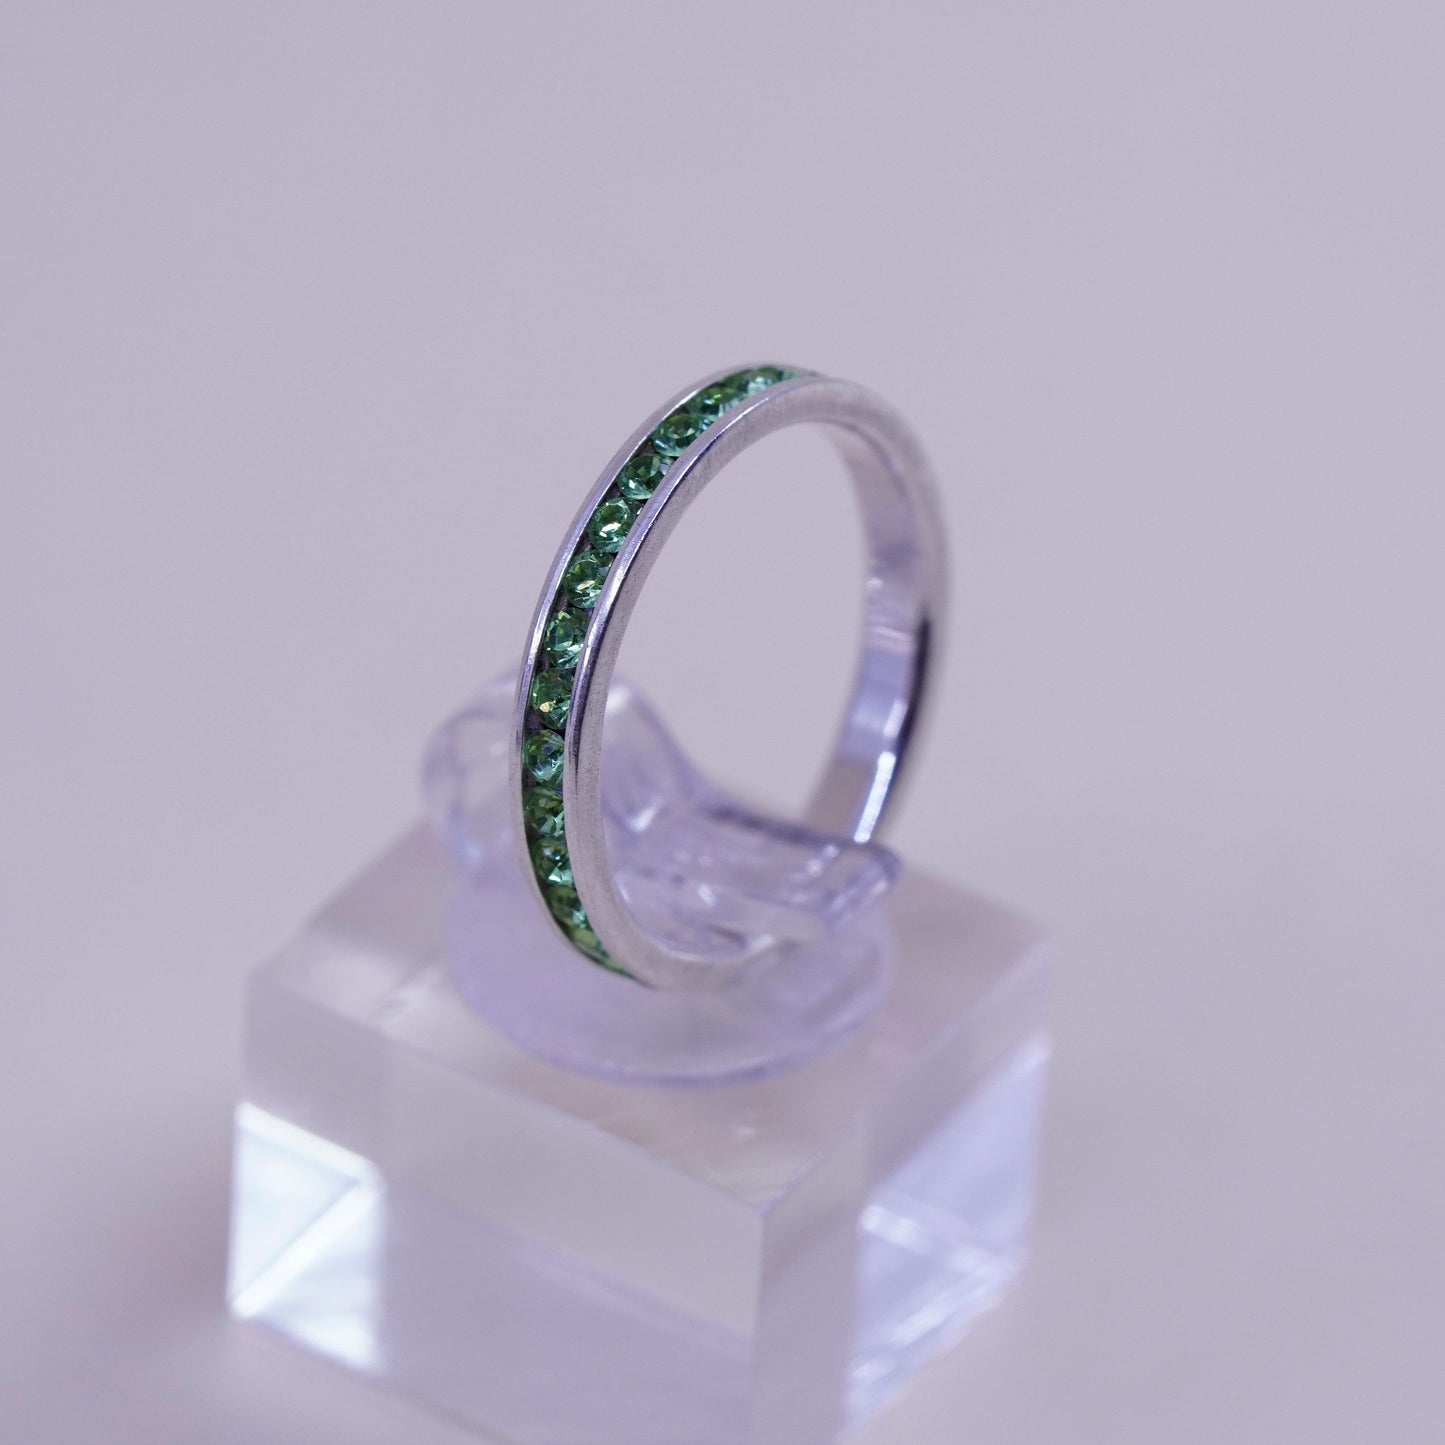 Size 8, Vintage sterling 925 silver ring, engagement band with green cz